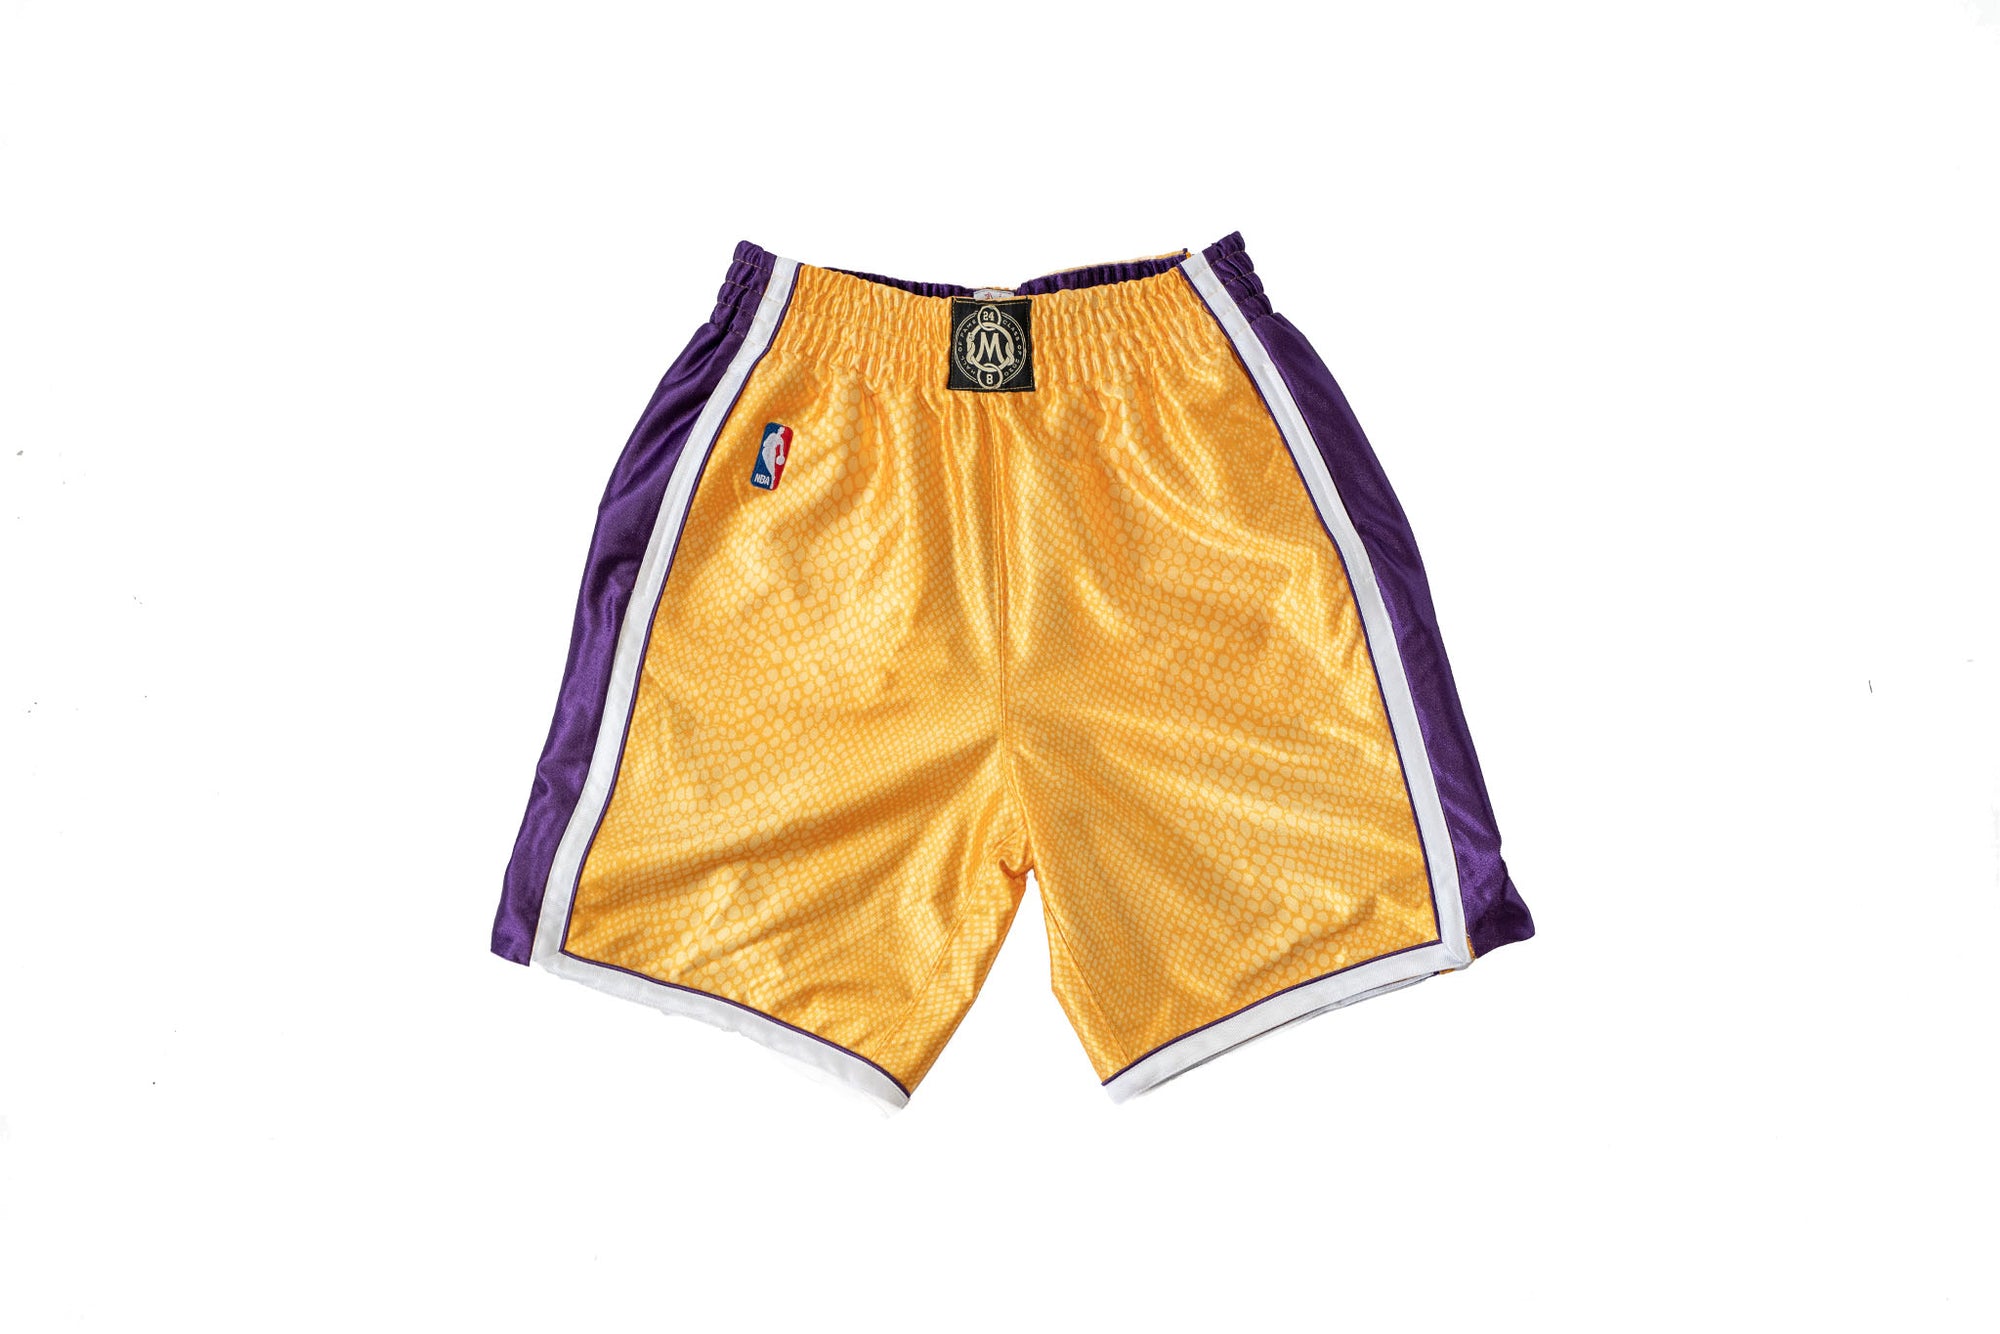 Kobe Bryant Los Angeles Lakers Mitchell & Ness Authentic Reversible Jersey  - Gold/Purple